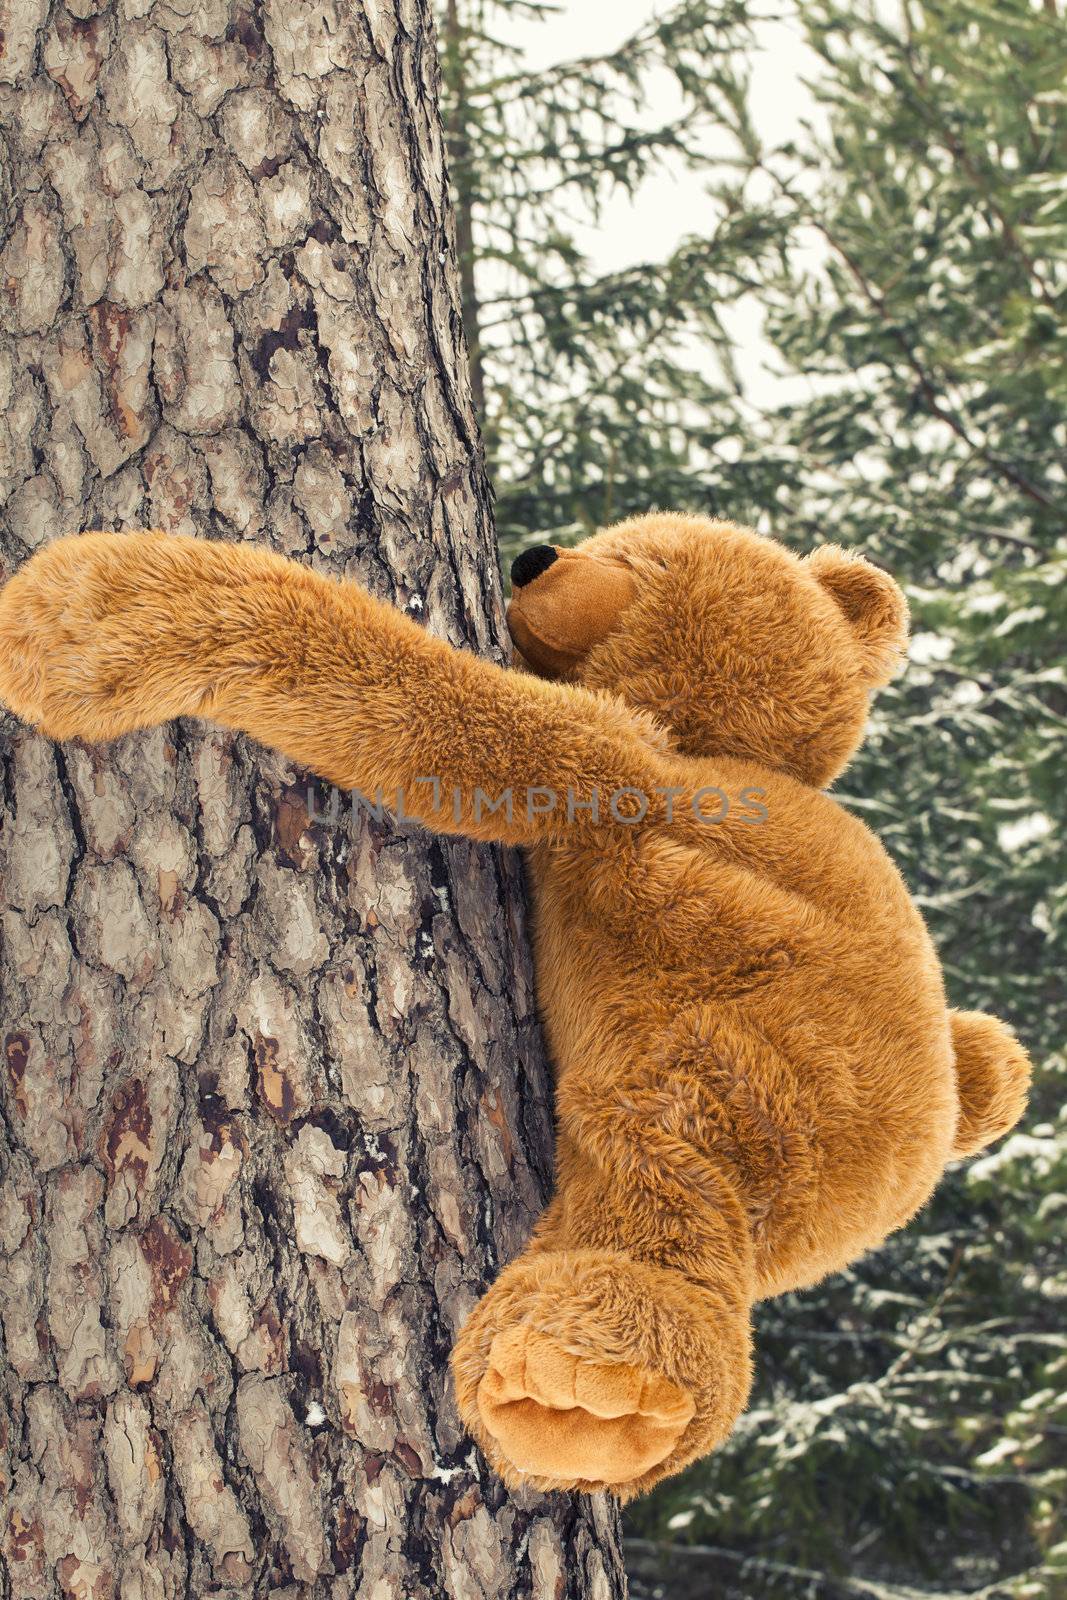 Toy bear climbing on a tree in forest by A.L.